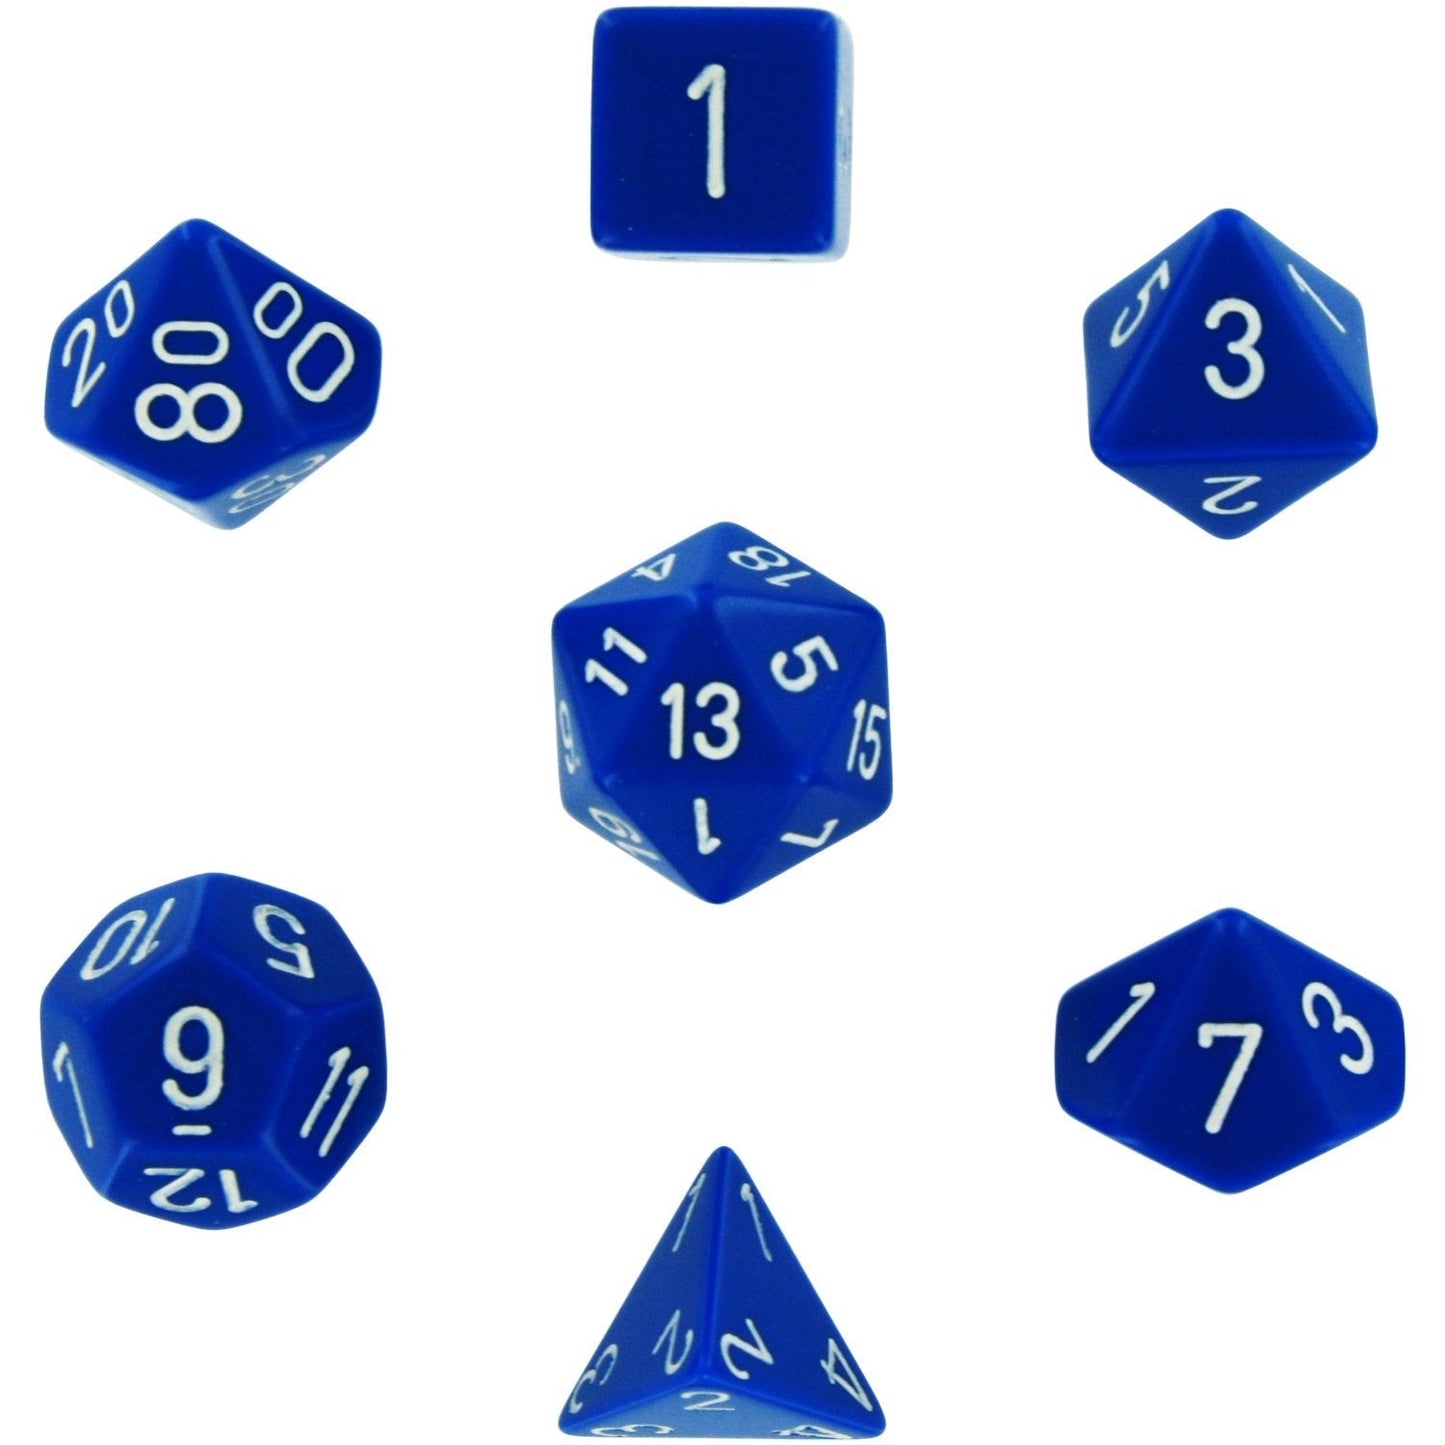 Chessex Dice: 7 Die Set - Opaque - Blue with White (CHX 25406) - Gamescape